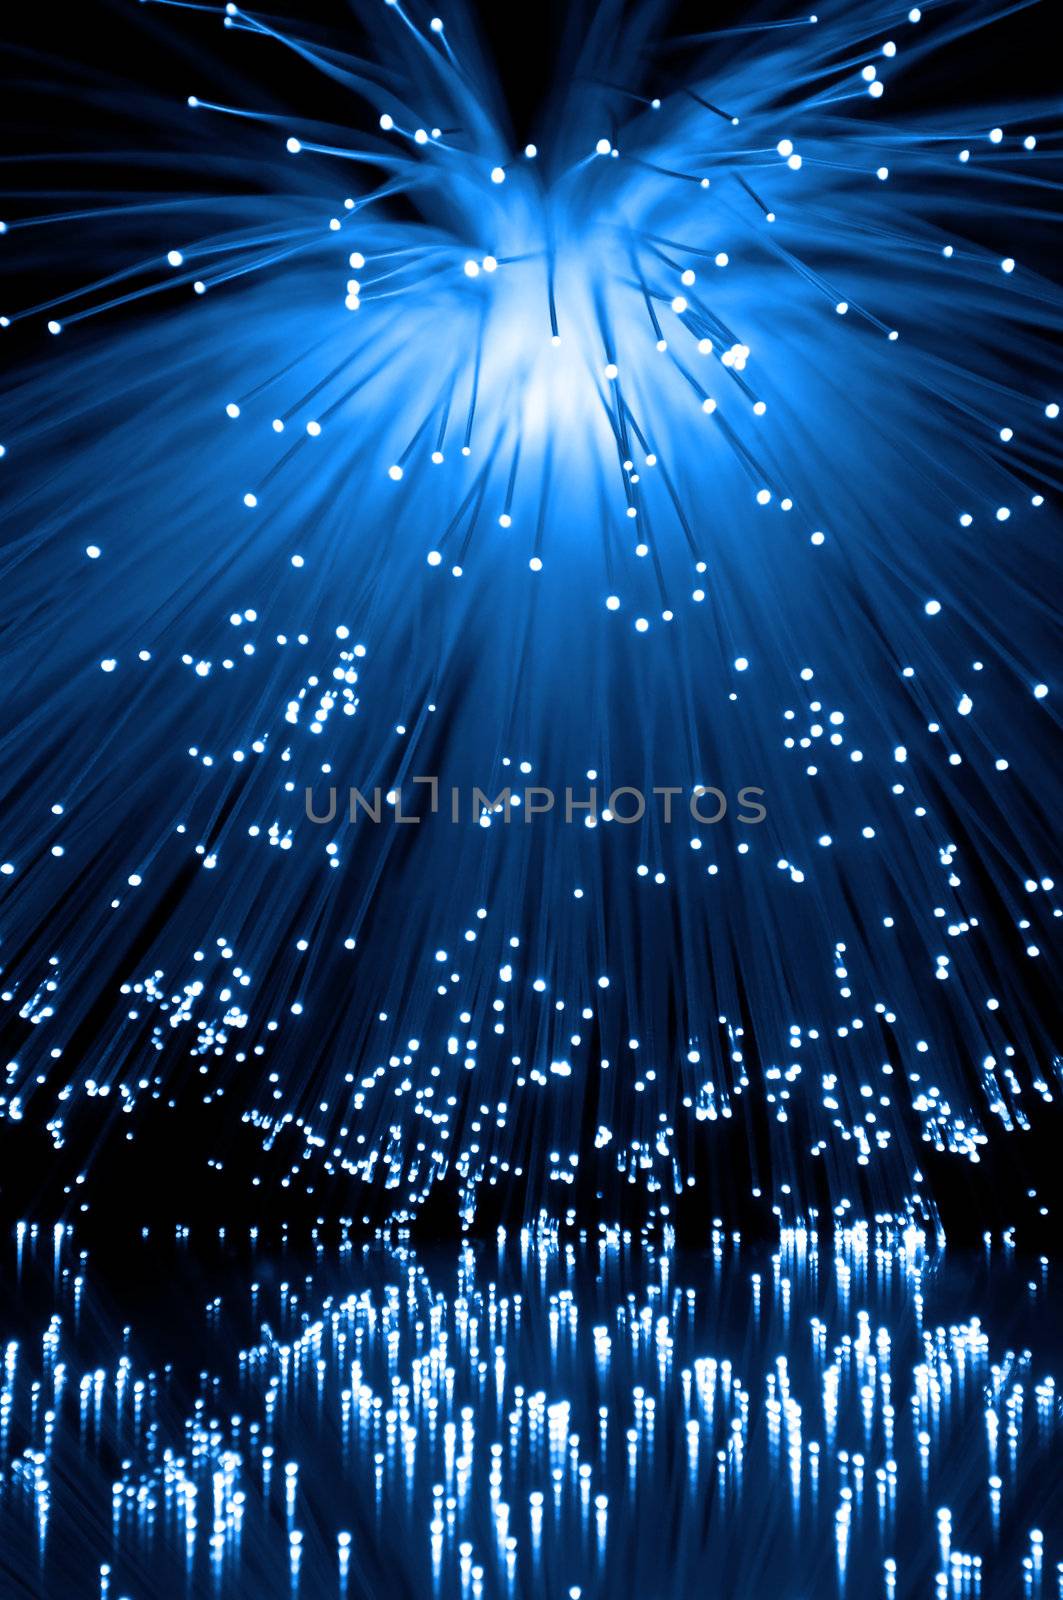 Many illuminated blue fiber optic light strands cascading down and reflecting into the foreground. Black background